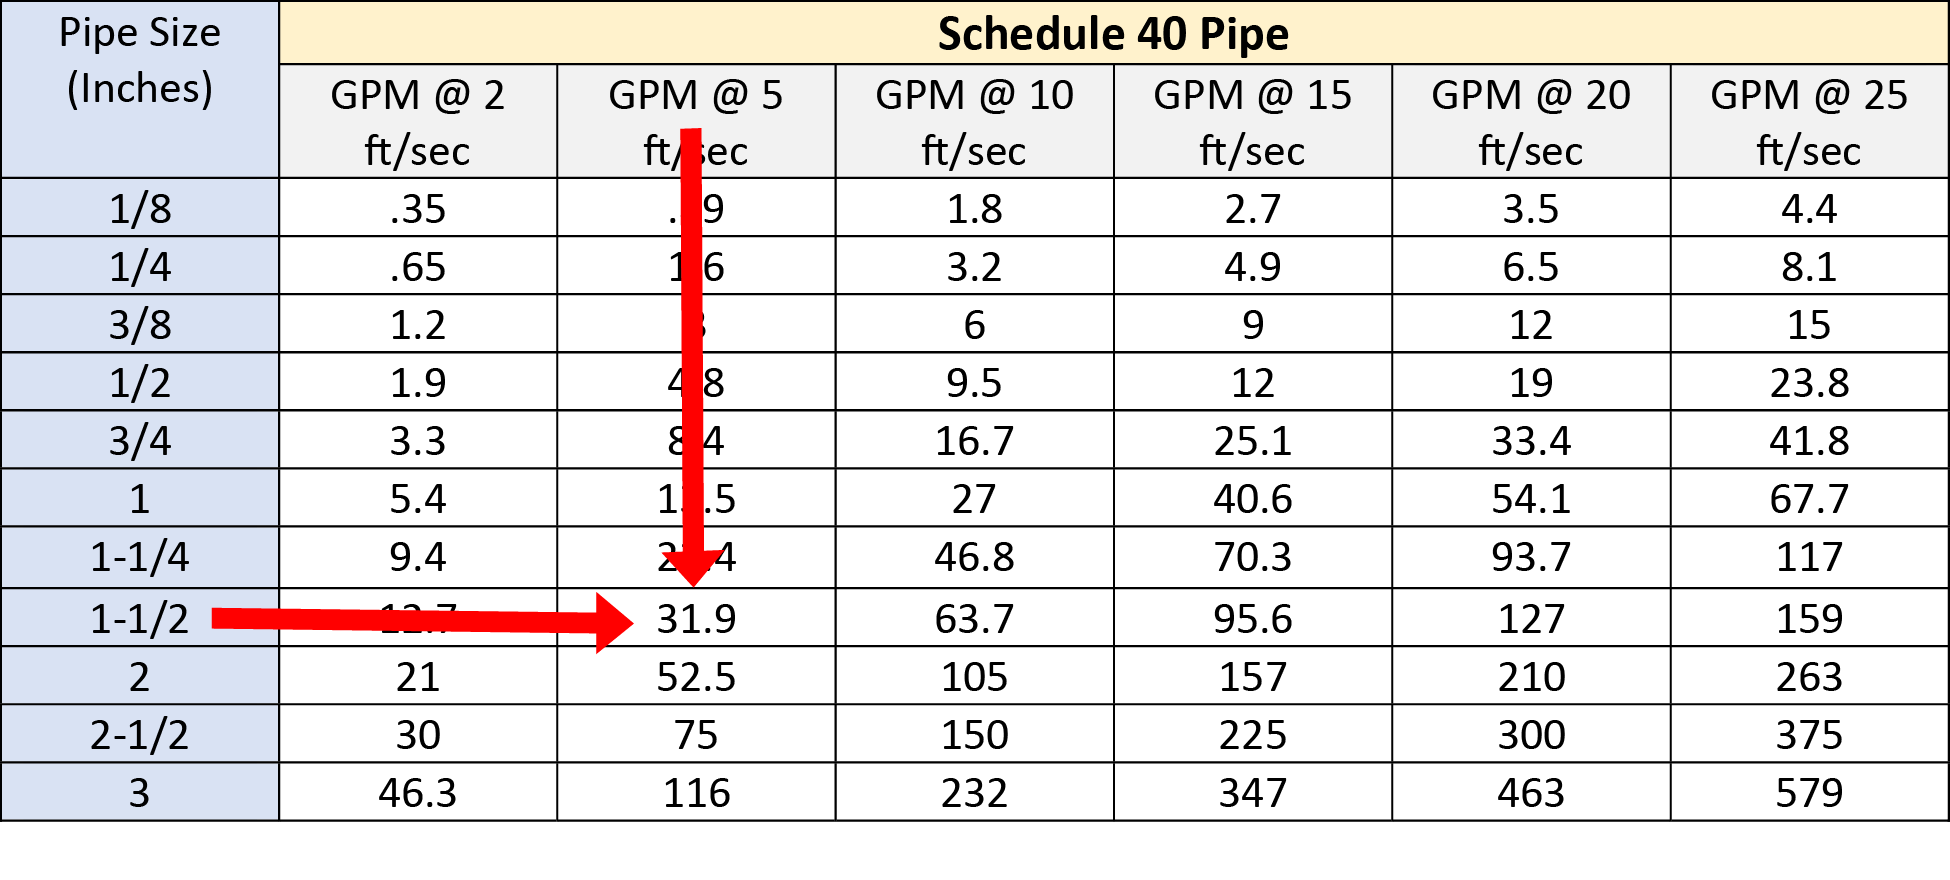 Figure 5 GPM HYDRAULIC CONSULTING, INC.